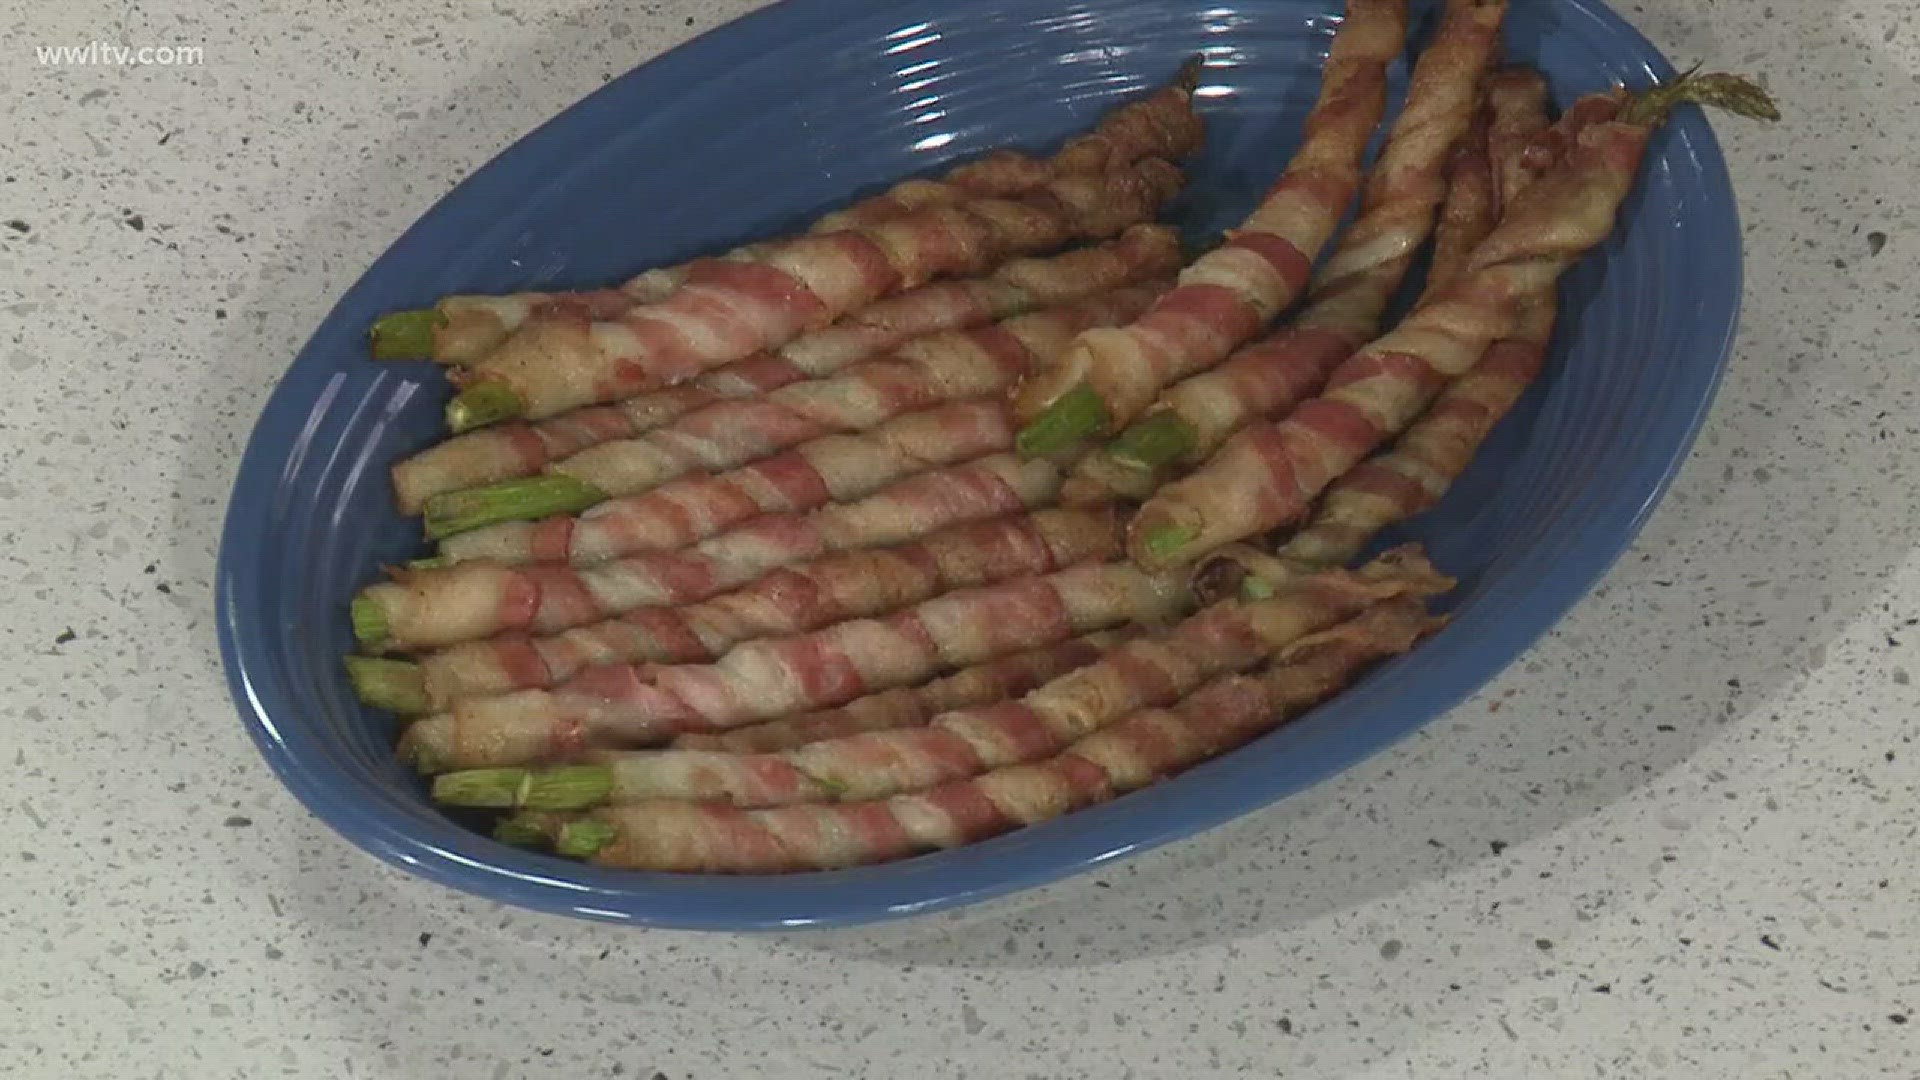 Chef Kevin Belton shares a delicious bacon wrapped asparagus recipe.